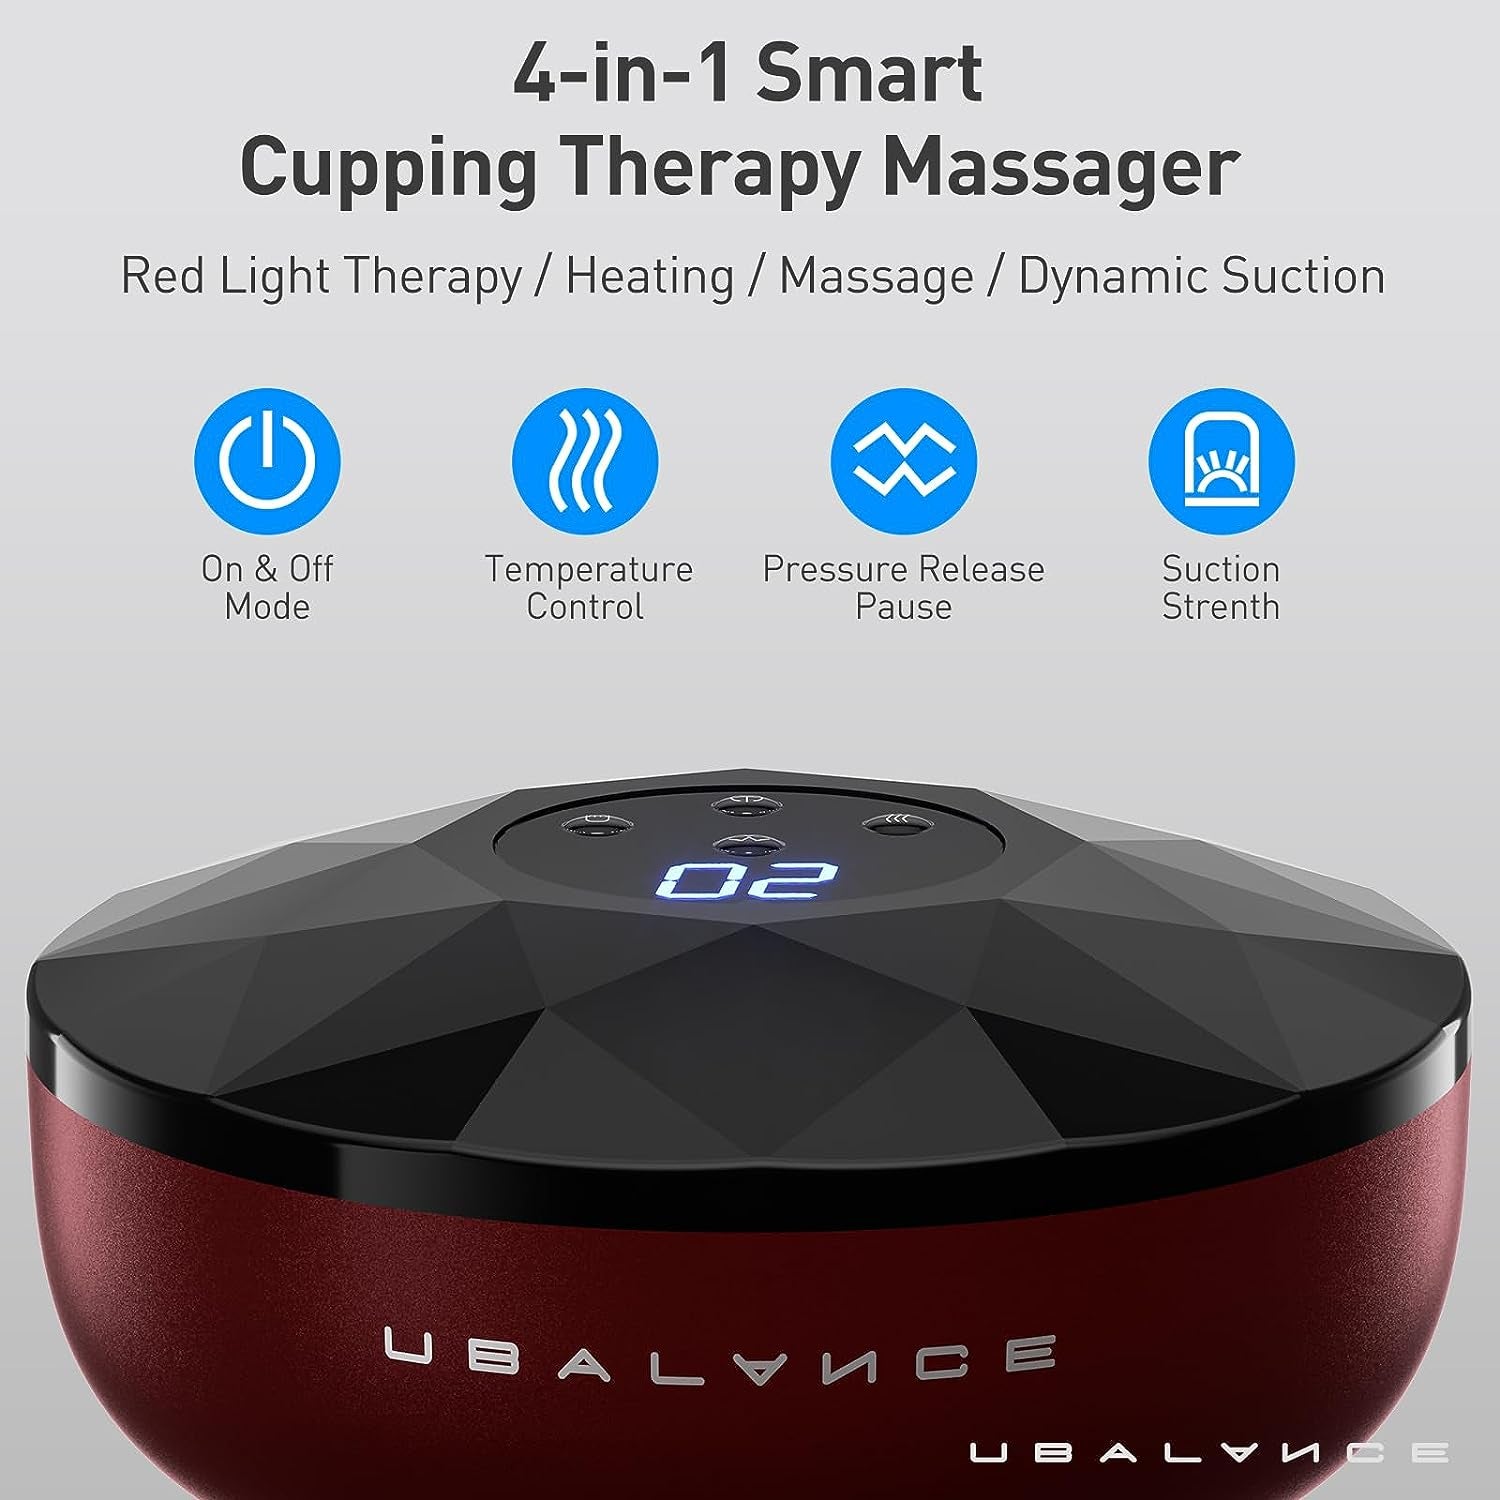 UBALANCE Electric Cupping Therapy Set - 4 in 1 Smart Cellulite Massager with Red Light Therapy for Stress Pain Relief, Muscle Knots,Circulation,Tighter Skin - Portable Cupping Kit-Red